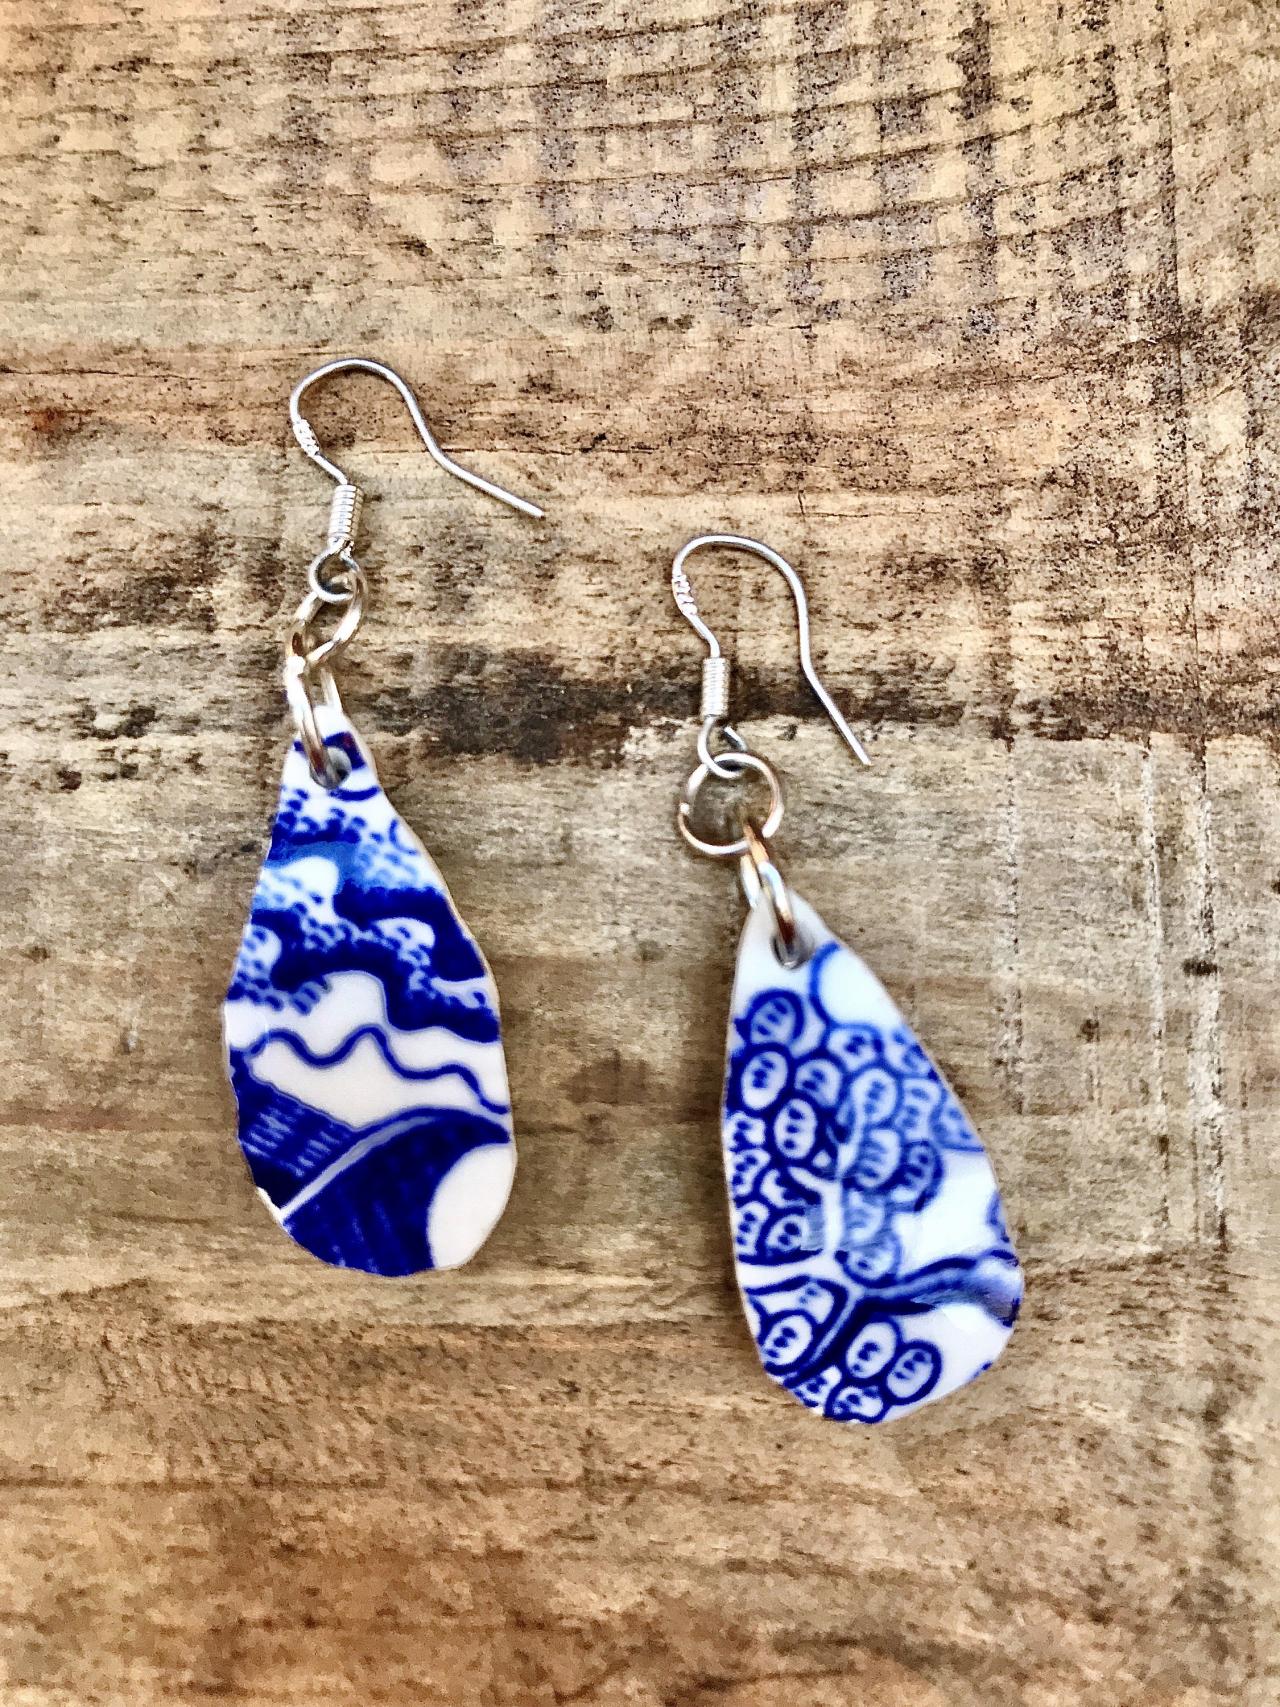 Sweet Vintage Willow Pattern Blue & White China Earrings